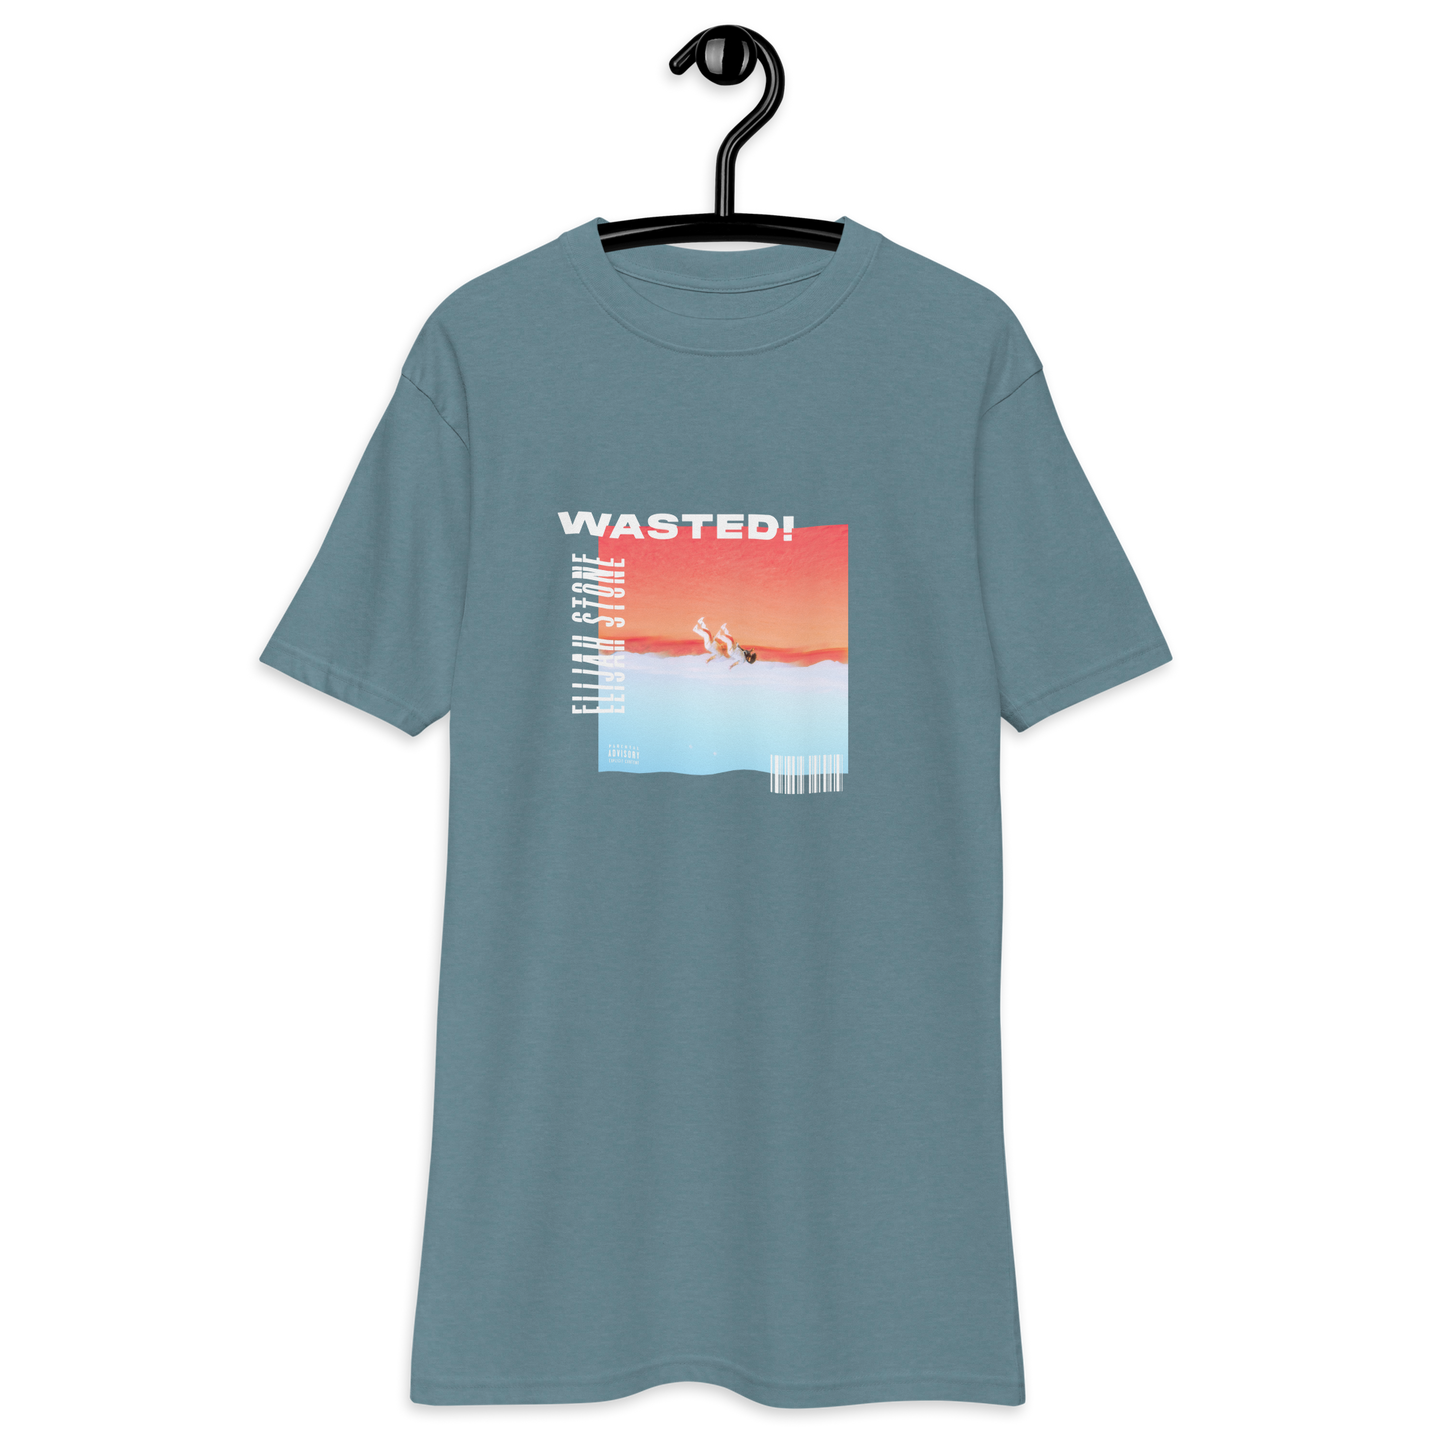 WASTED! T-Shirt